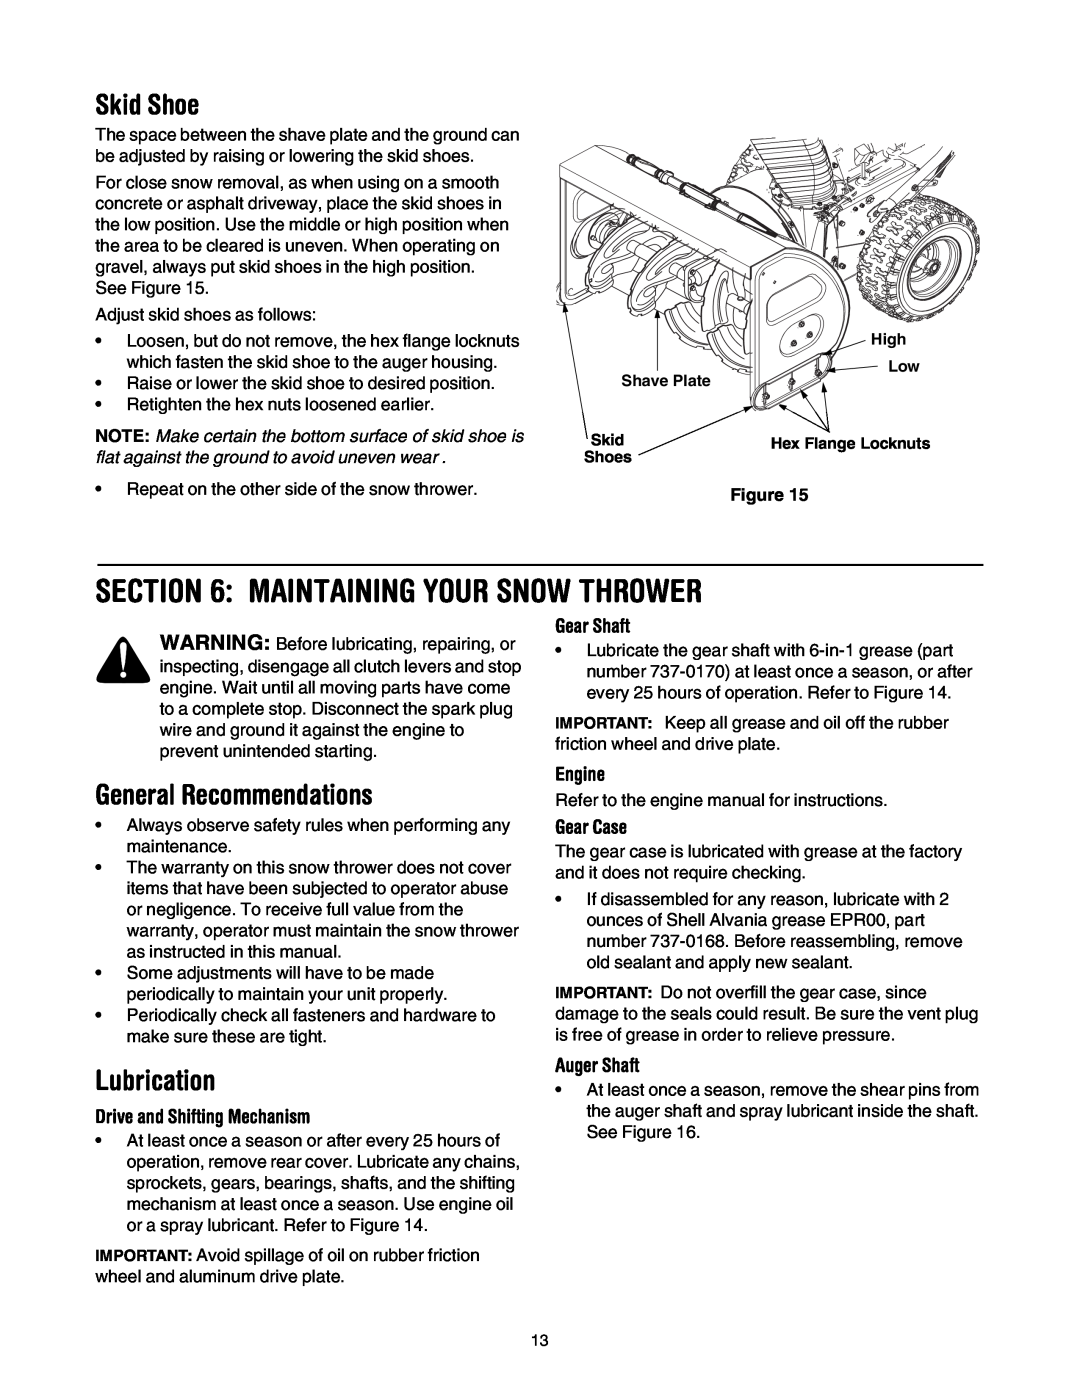 Yard-Man OGST-2806 manual Maintaining Your Snow Thrower, Skid Shoe, General Recommendations, Lubrication 